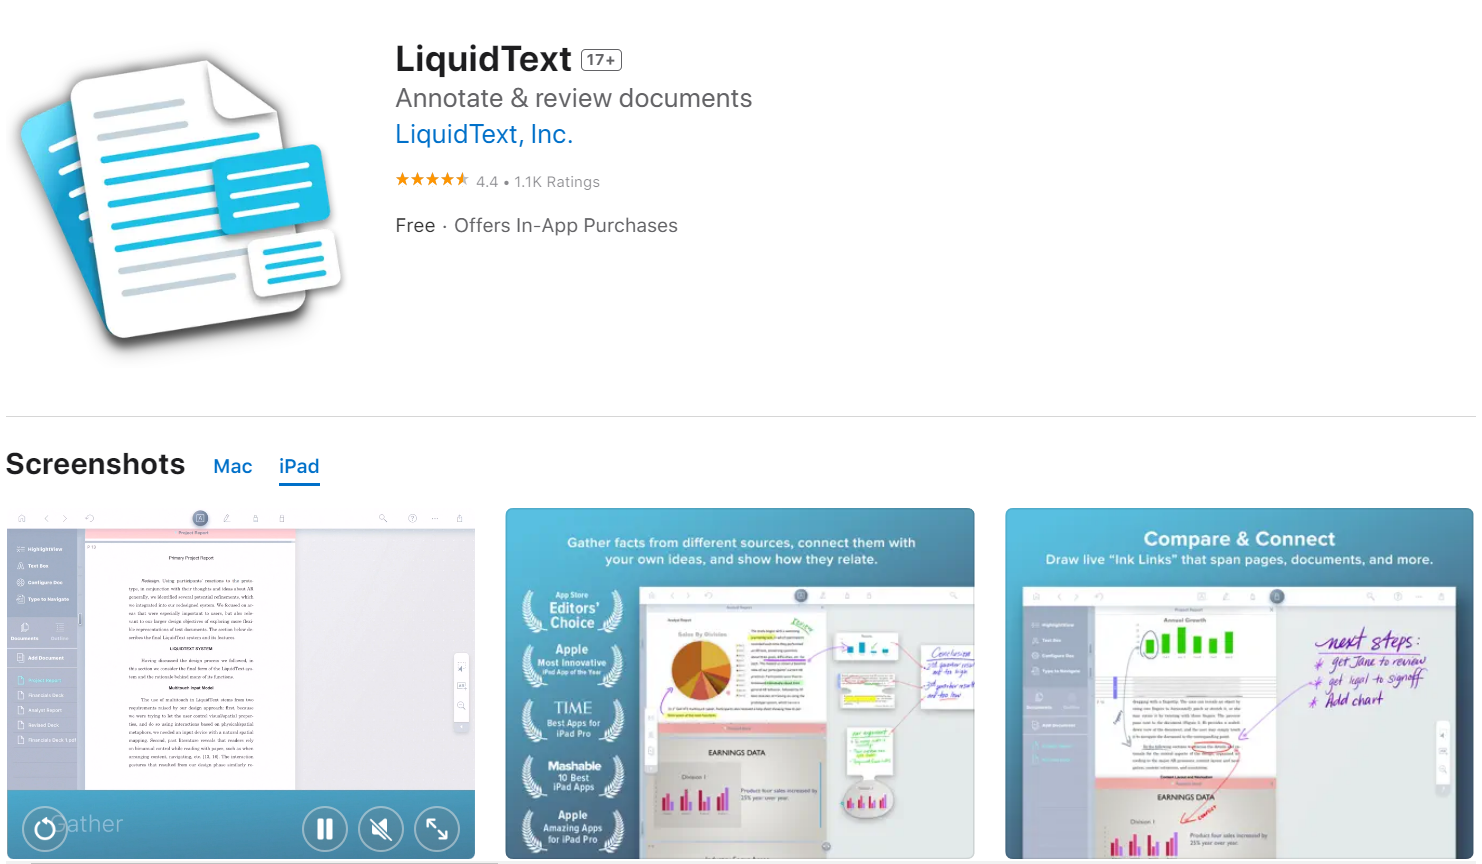 LiquidText is a note-taking app for iPads